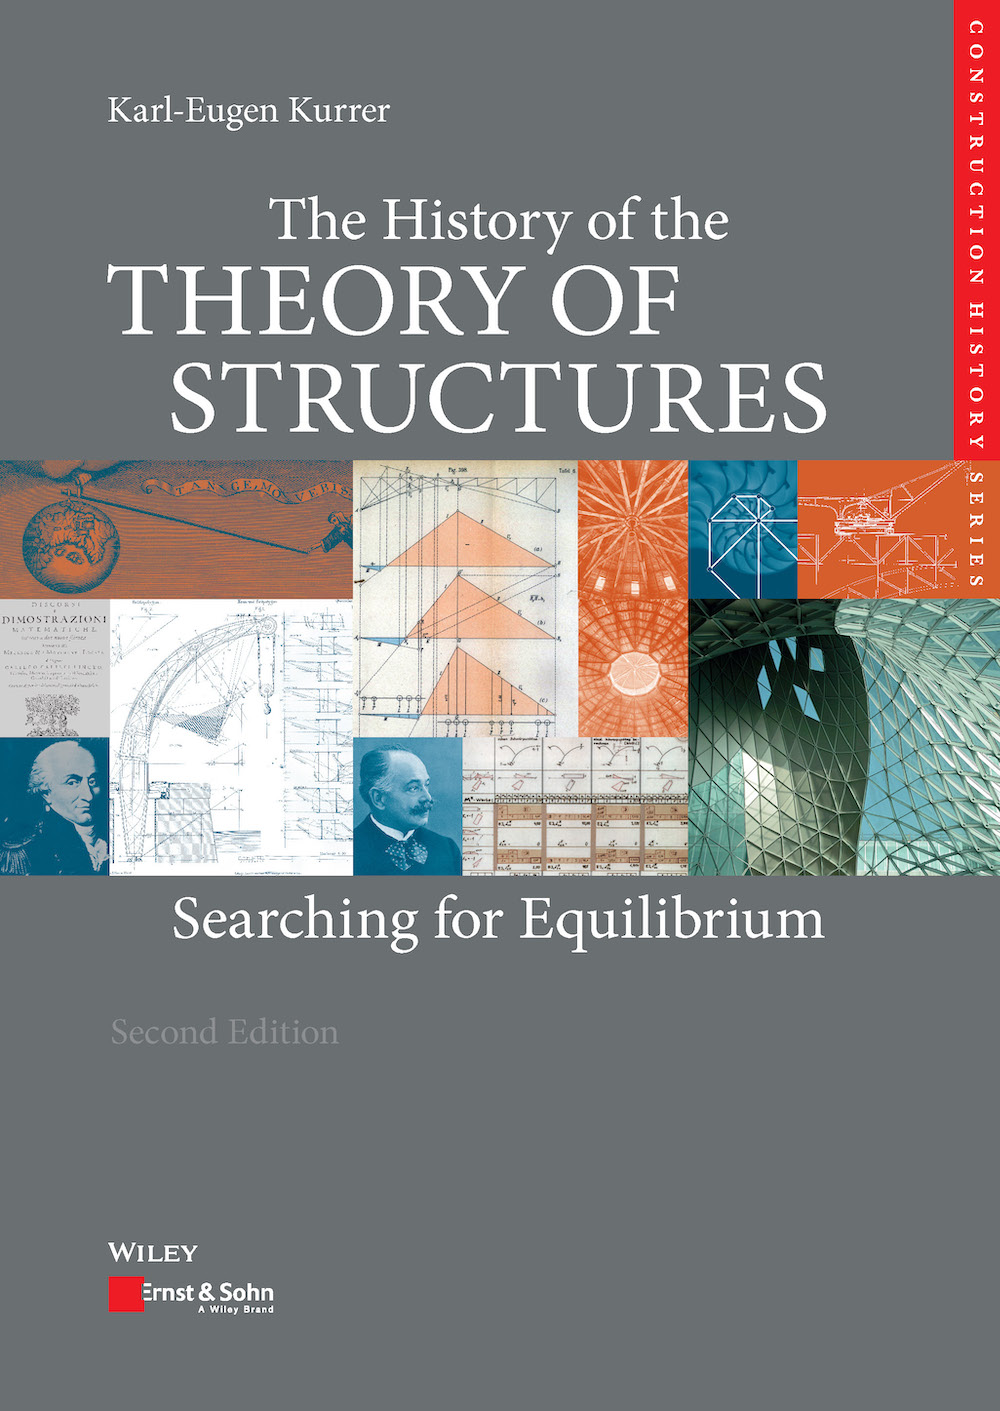 The History of the Theoryof Structures